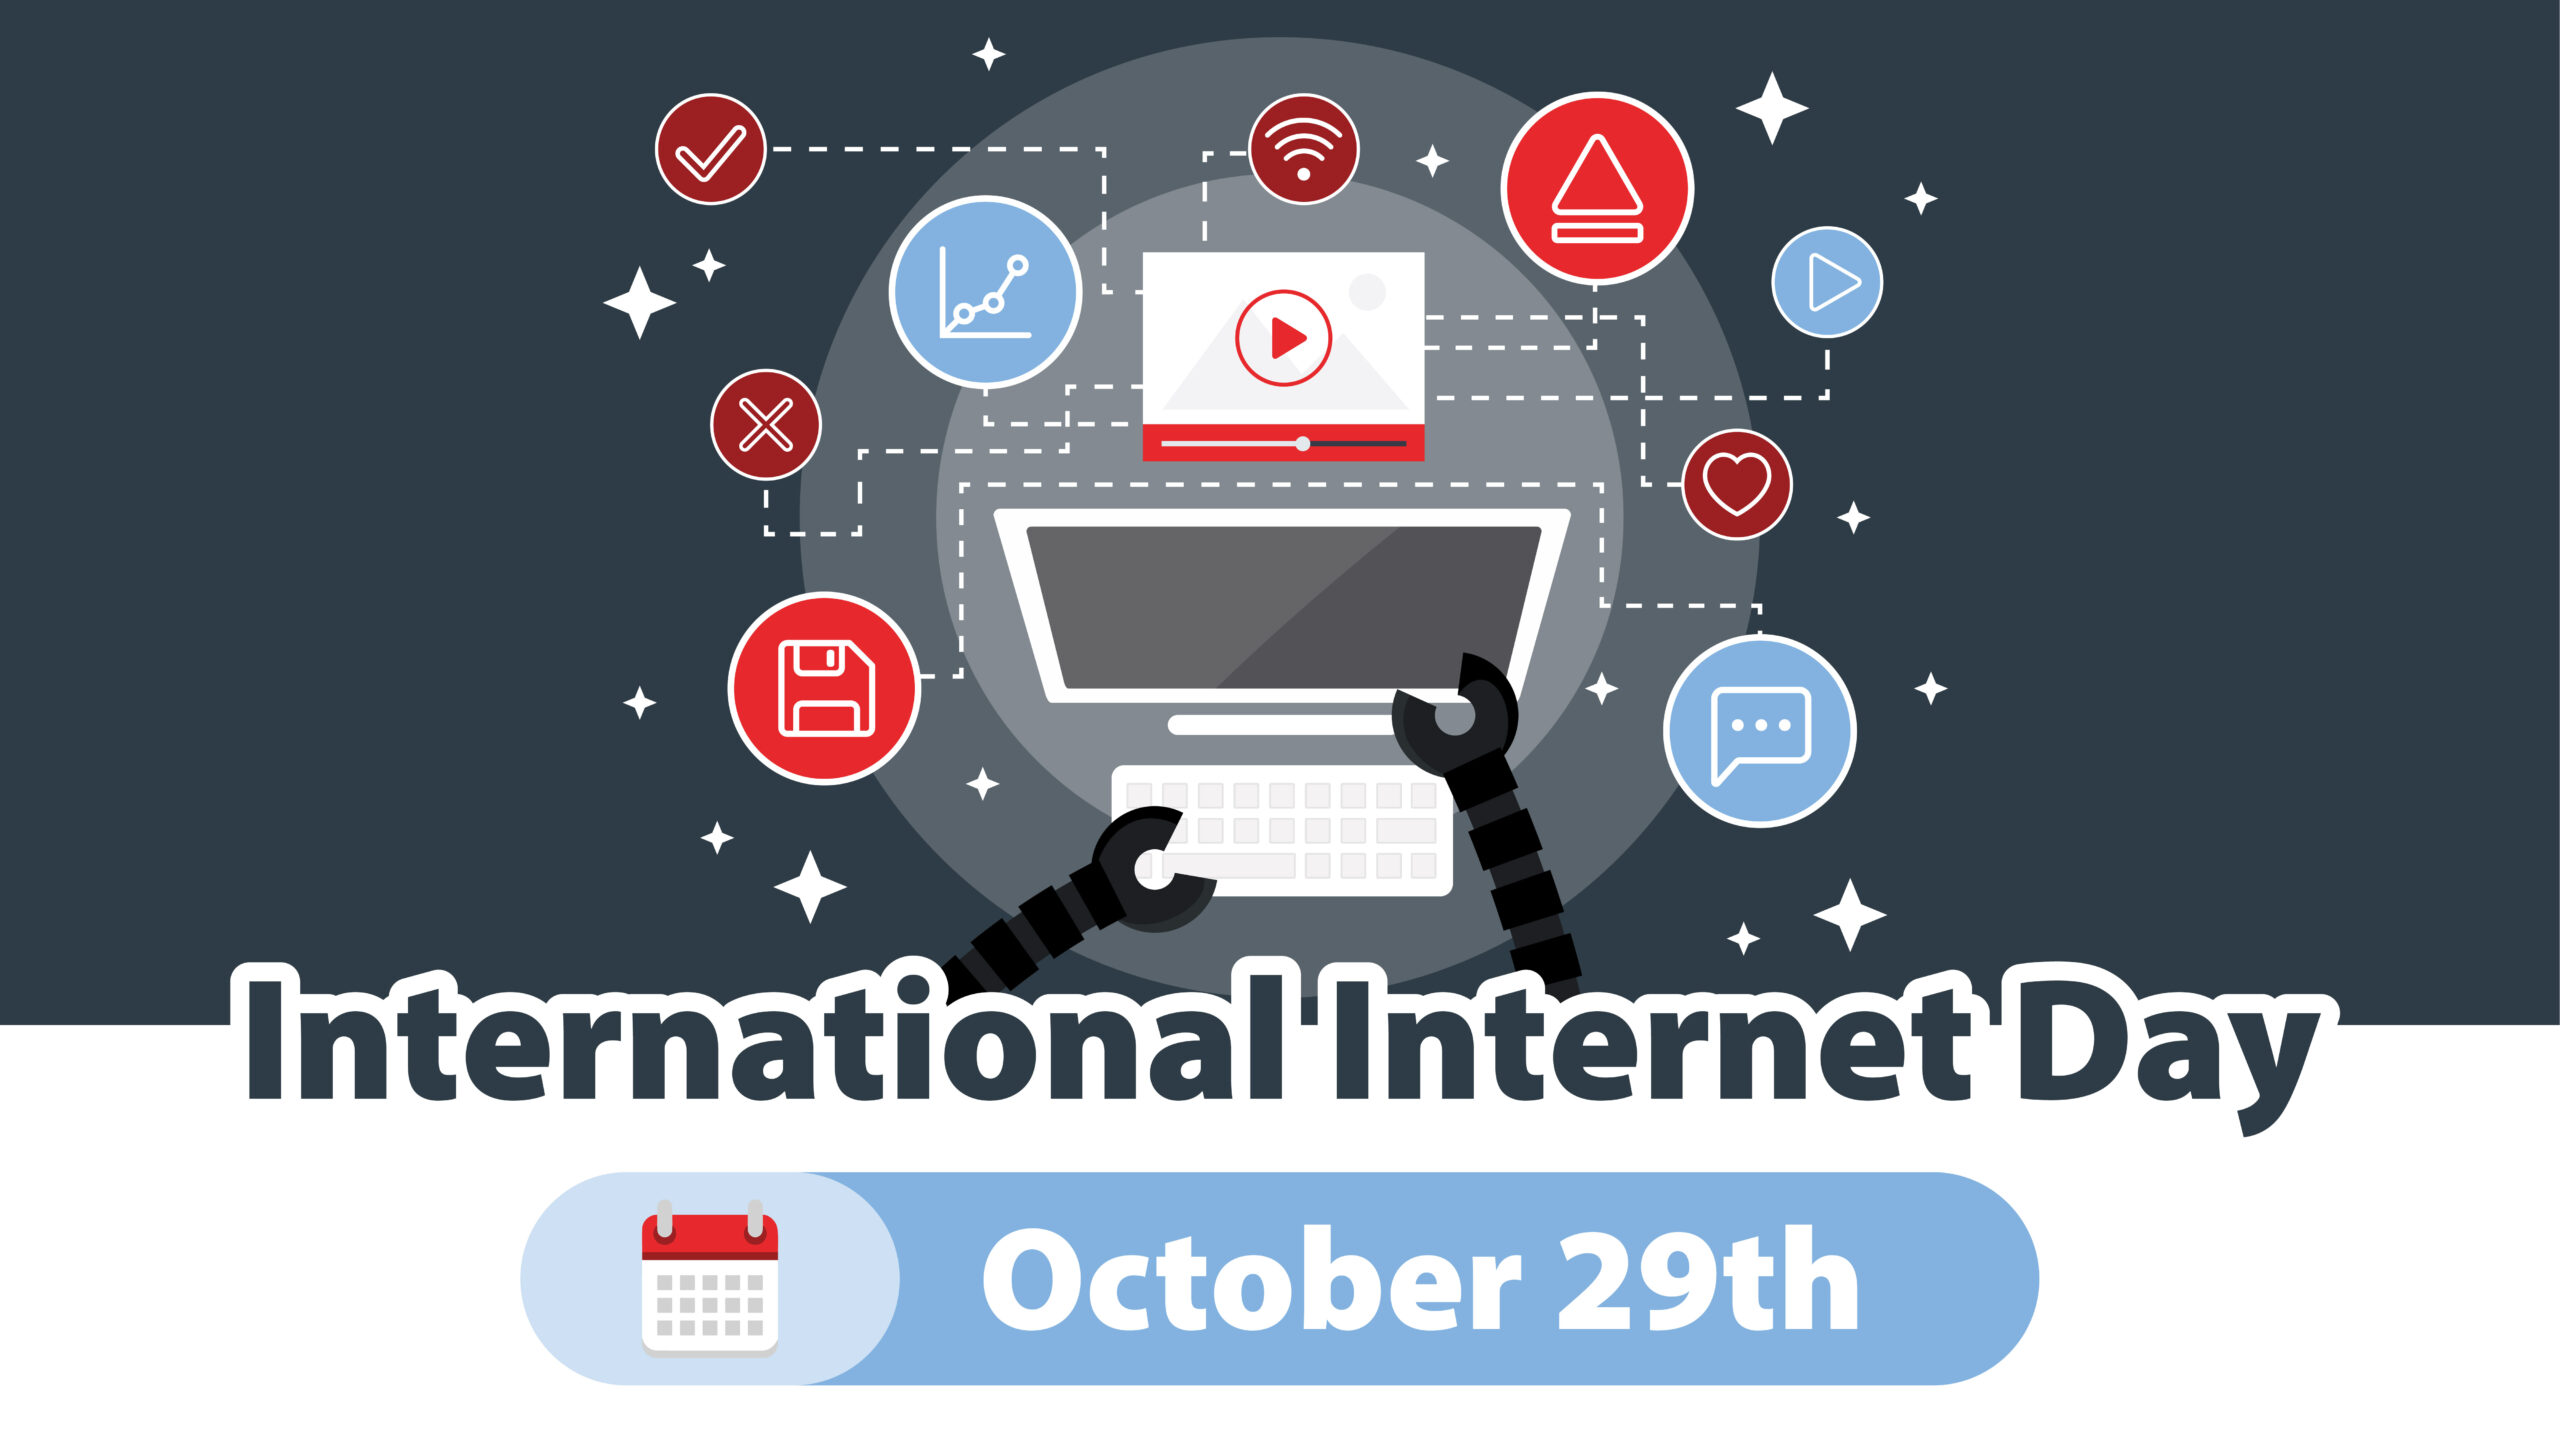 Time to Surf the Web on International Internet Day!